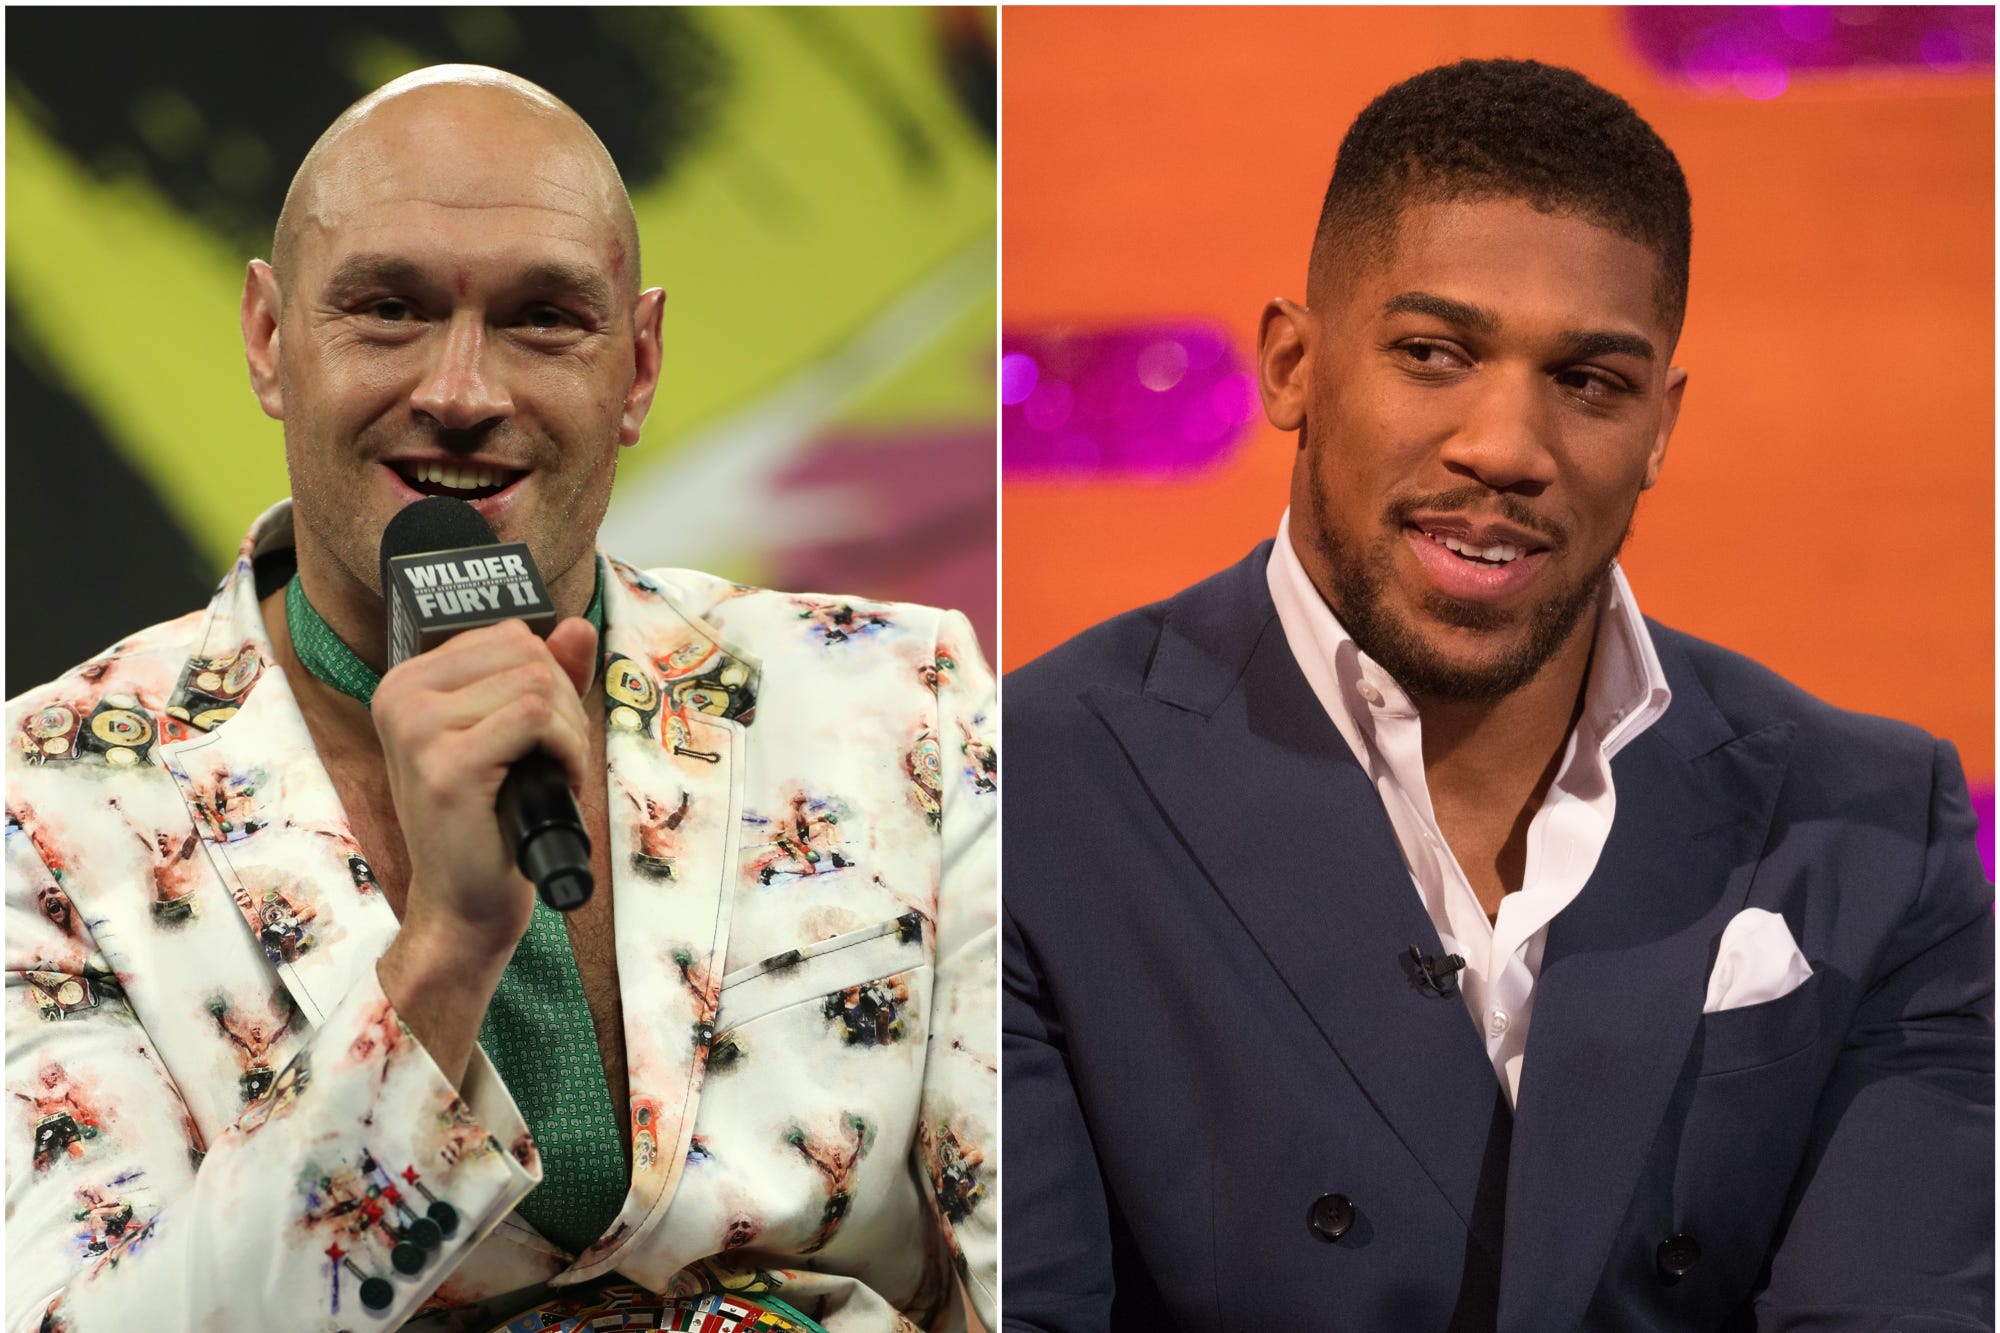 Anthony Joshua has spoken out against Tyson Fury